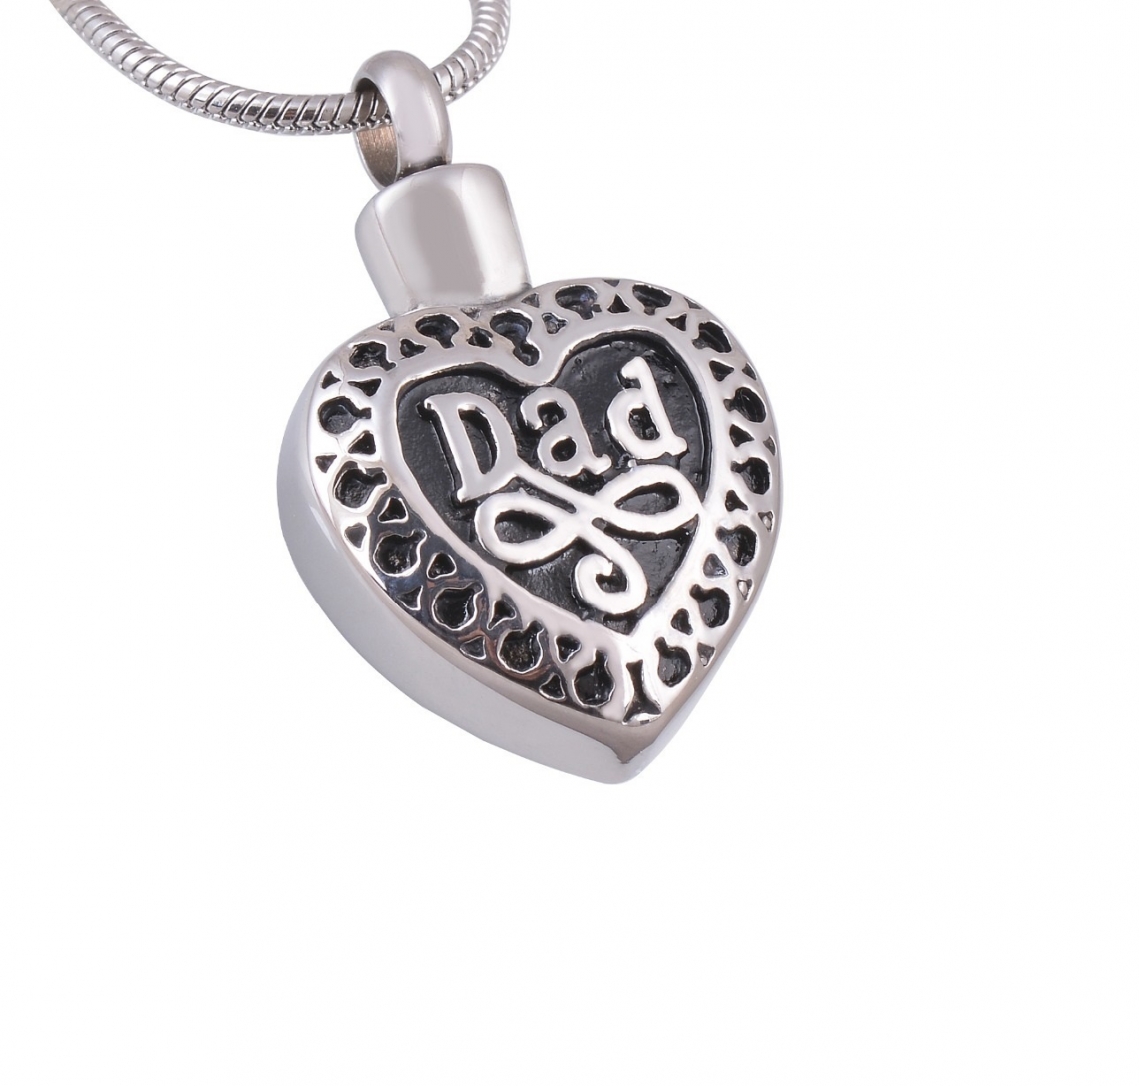 DAD Your Wings Were Ready Heart -Stainless Steel Cremation Ashes Jewellery Urn  Pendant